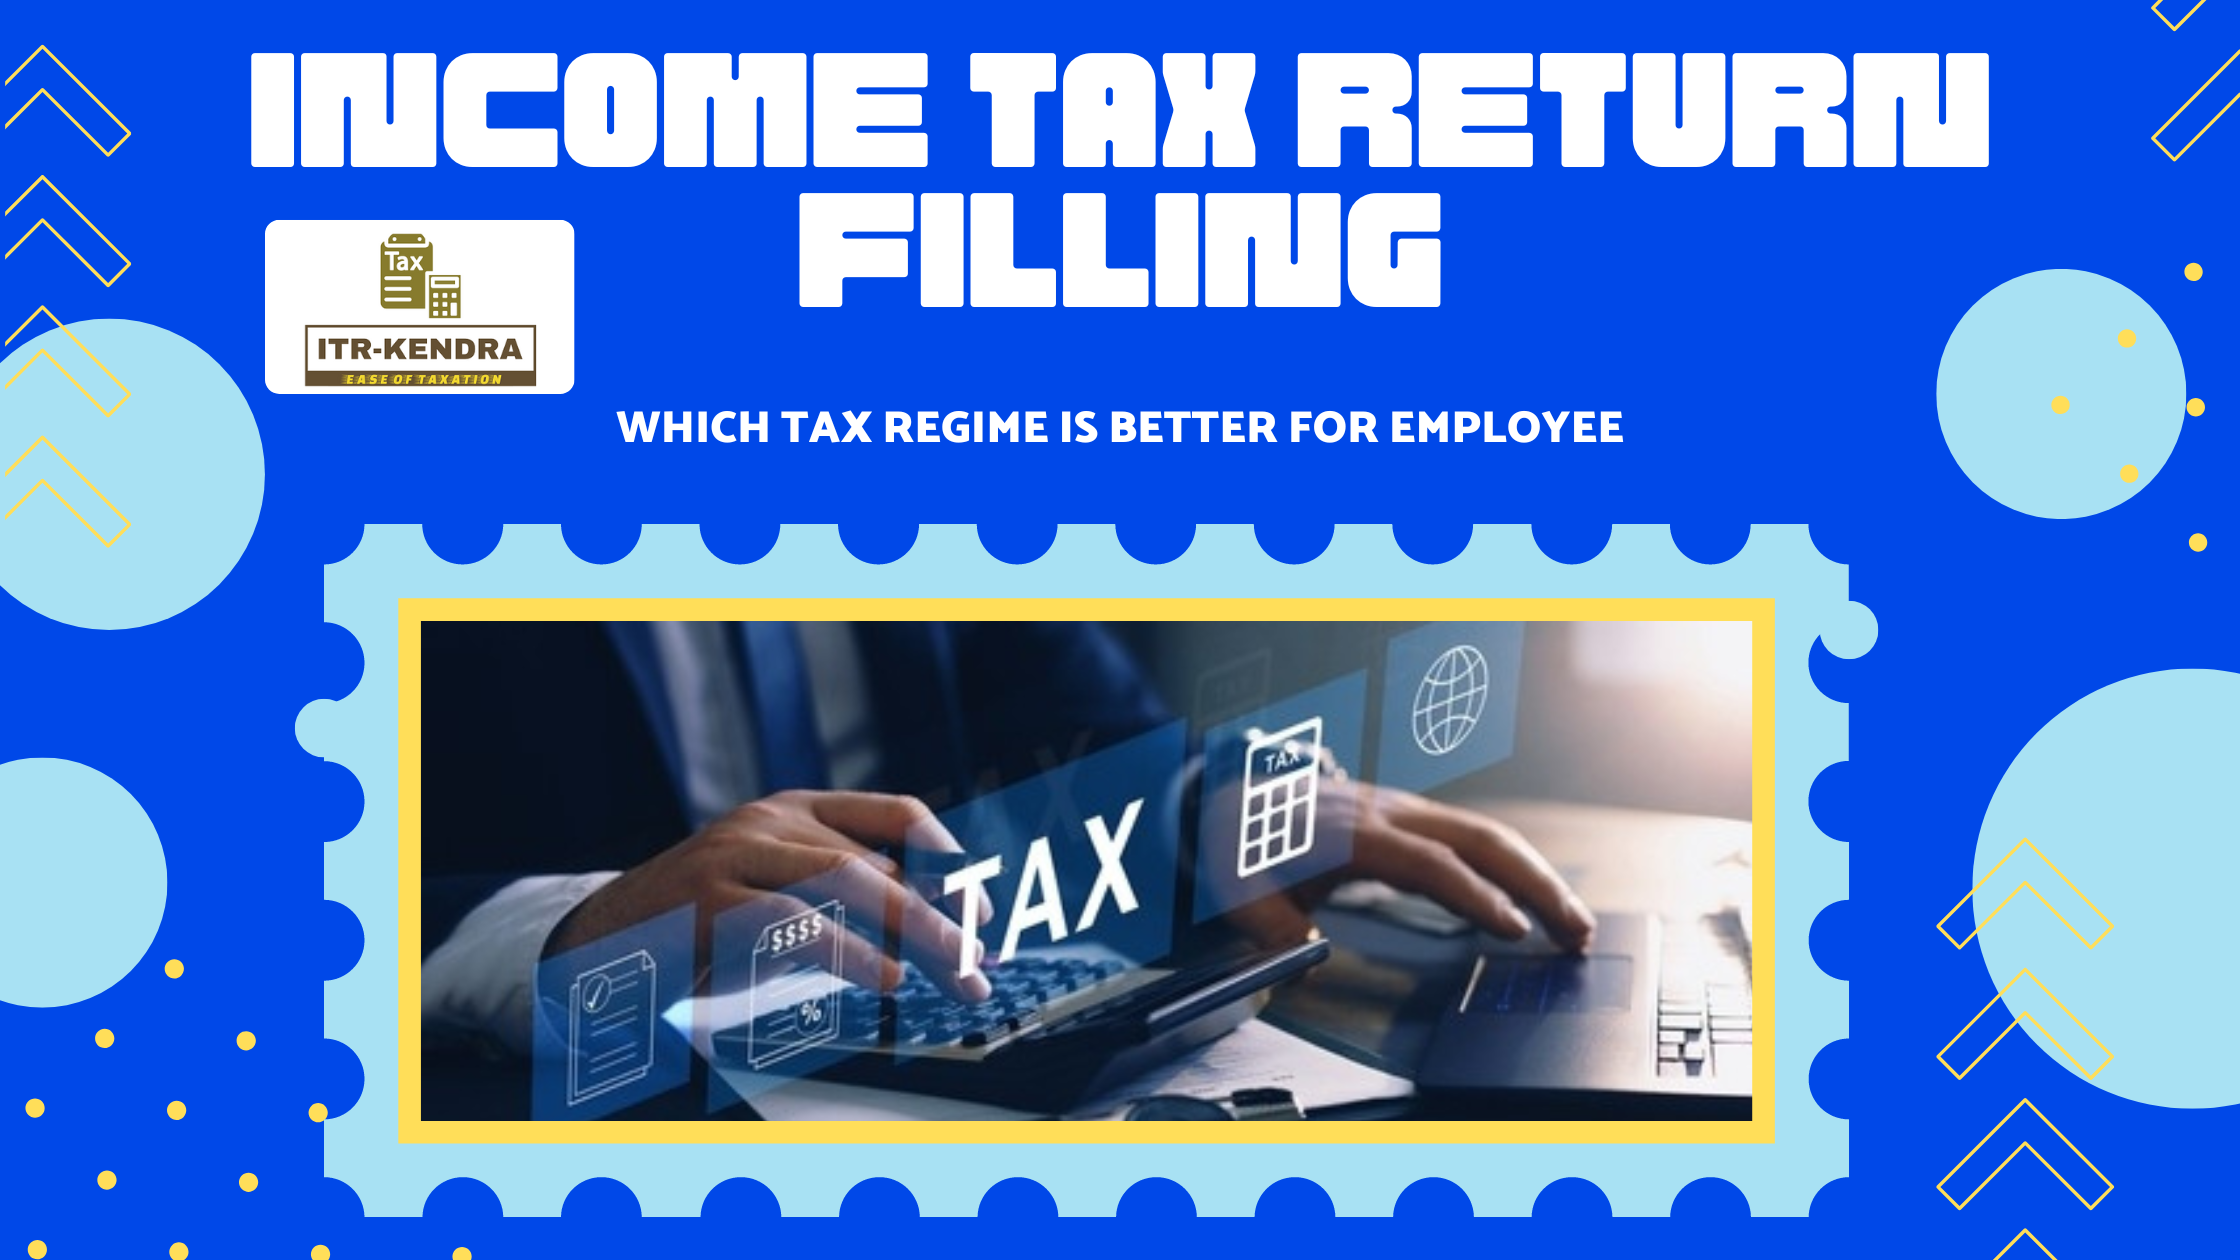 income-tax-return-filling-under-old-and-new-tax-regime-which-is-better